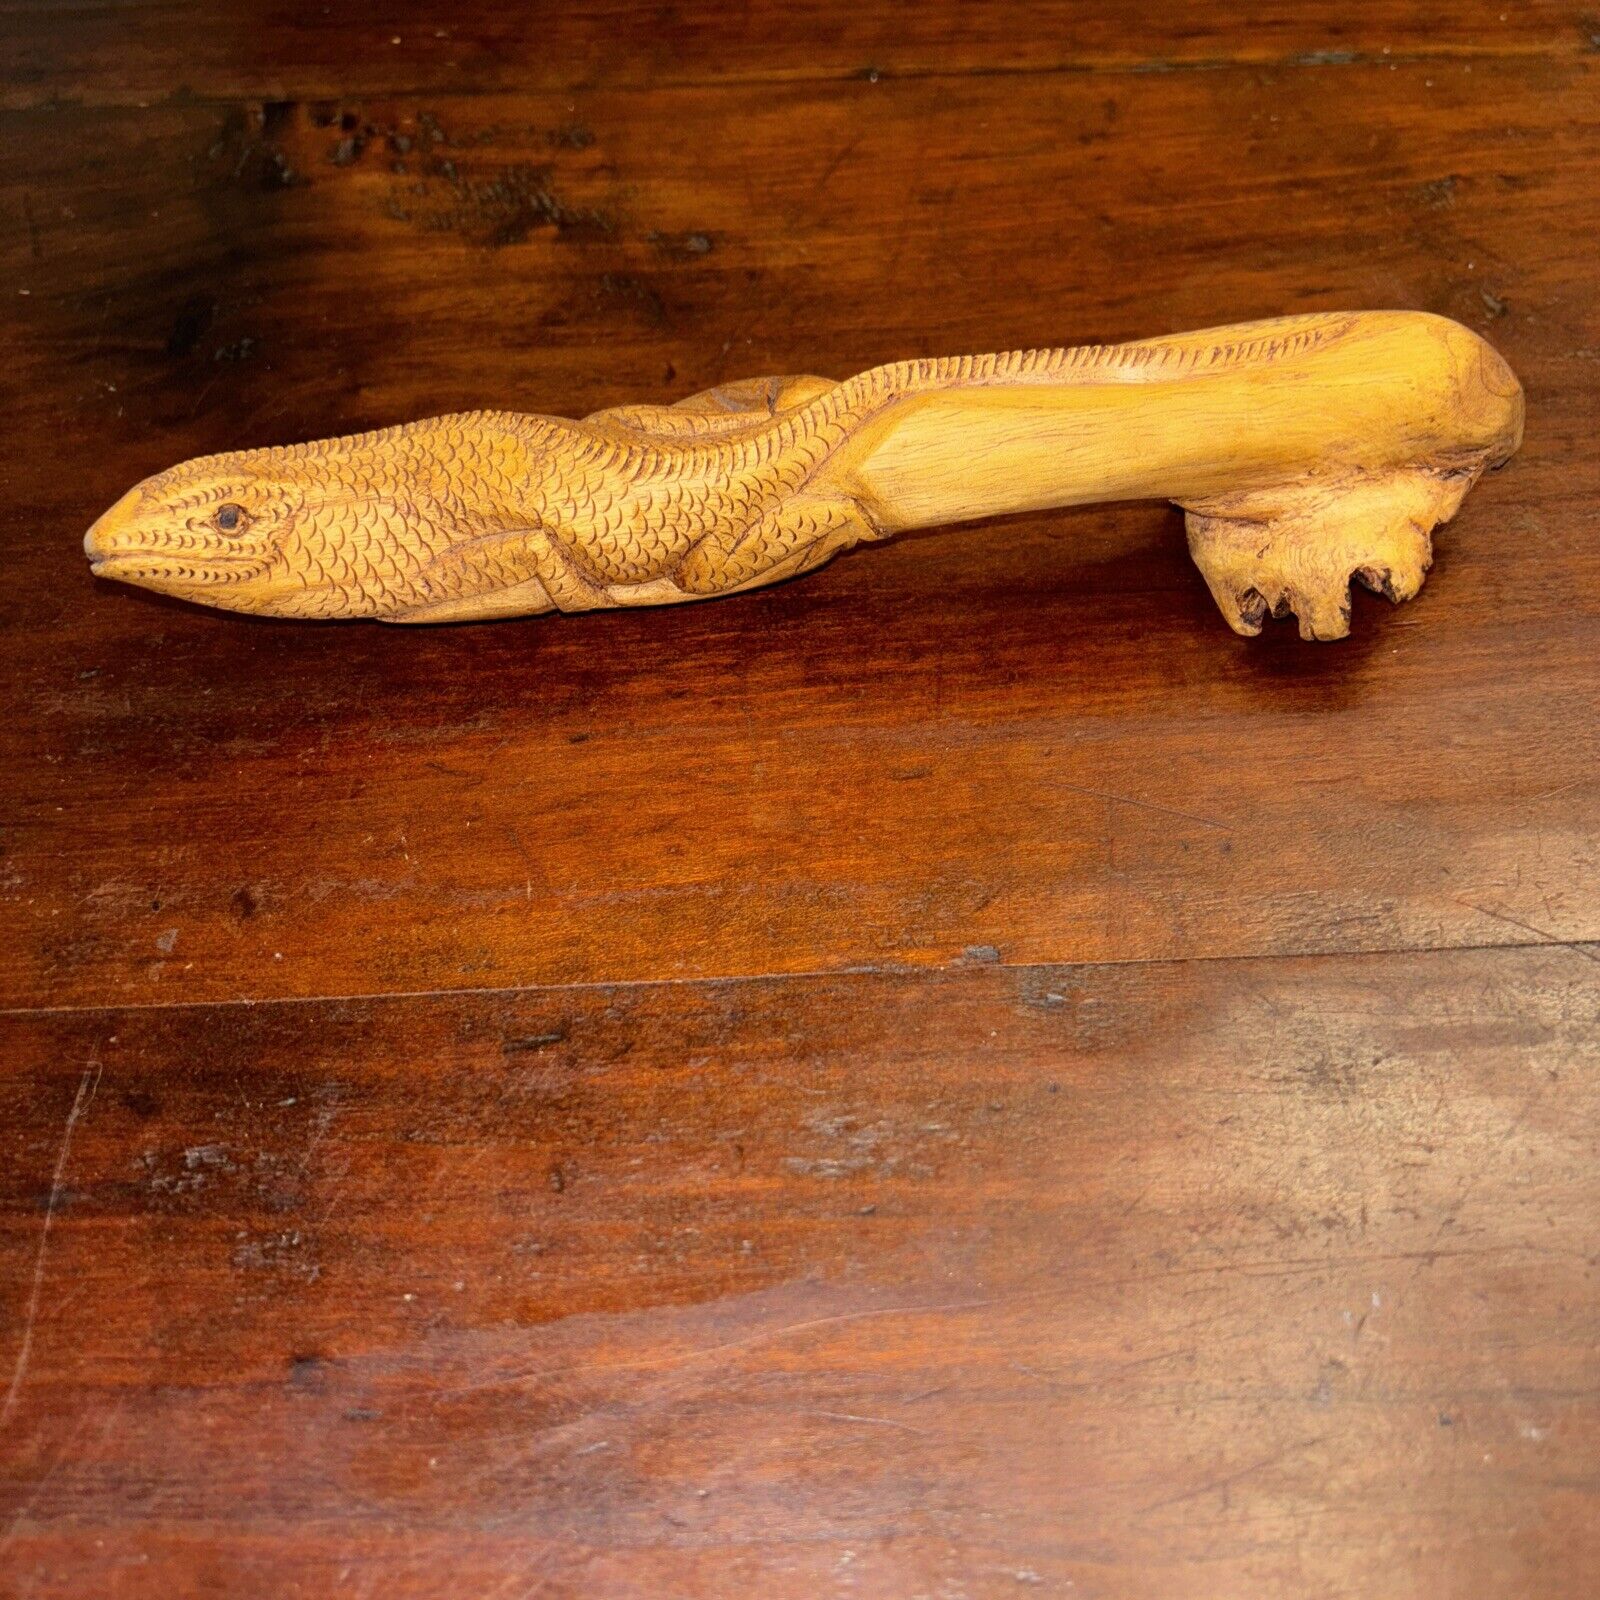 Hand Carved Wooden Lizard 9.5” Long